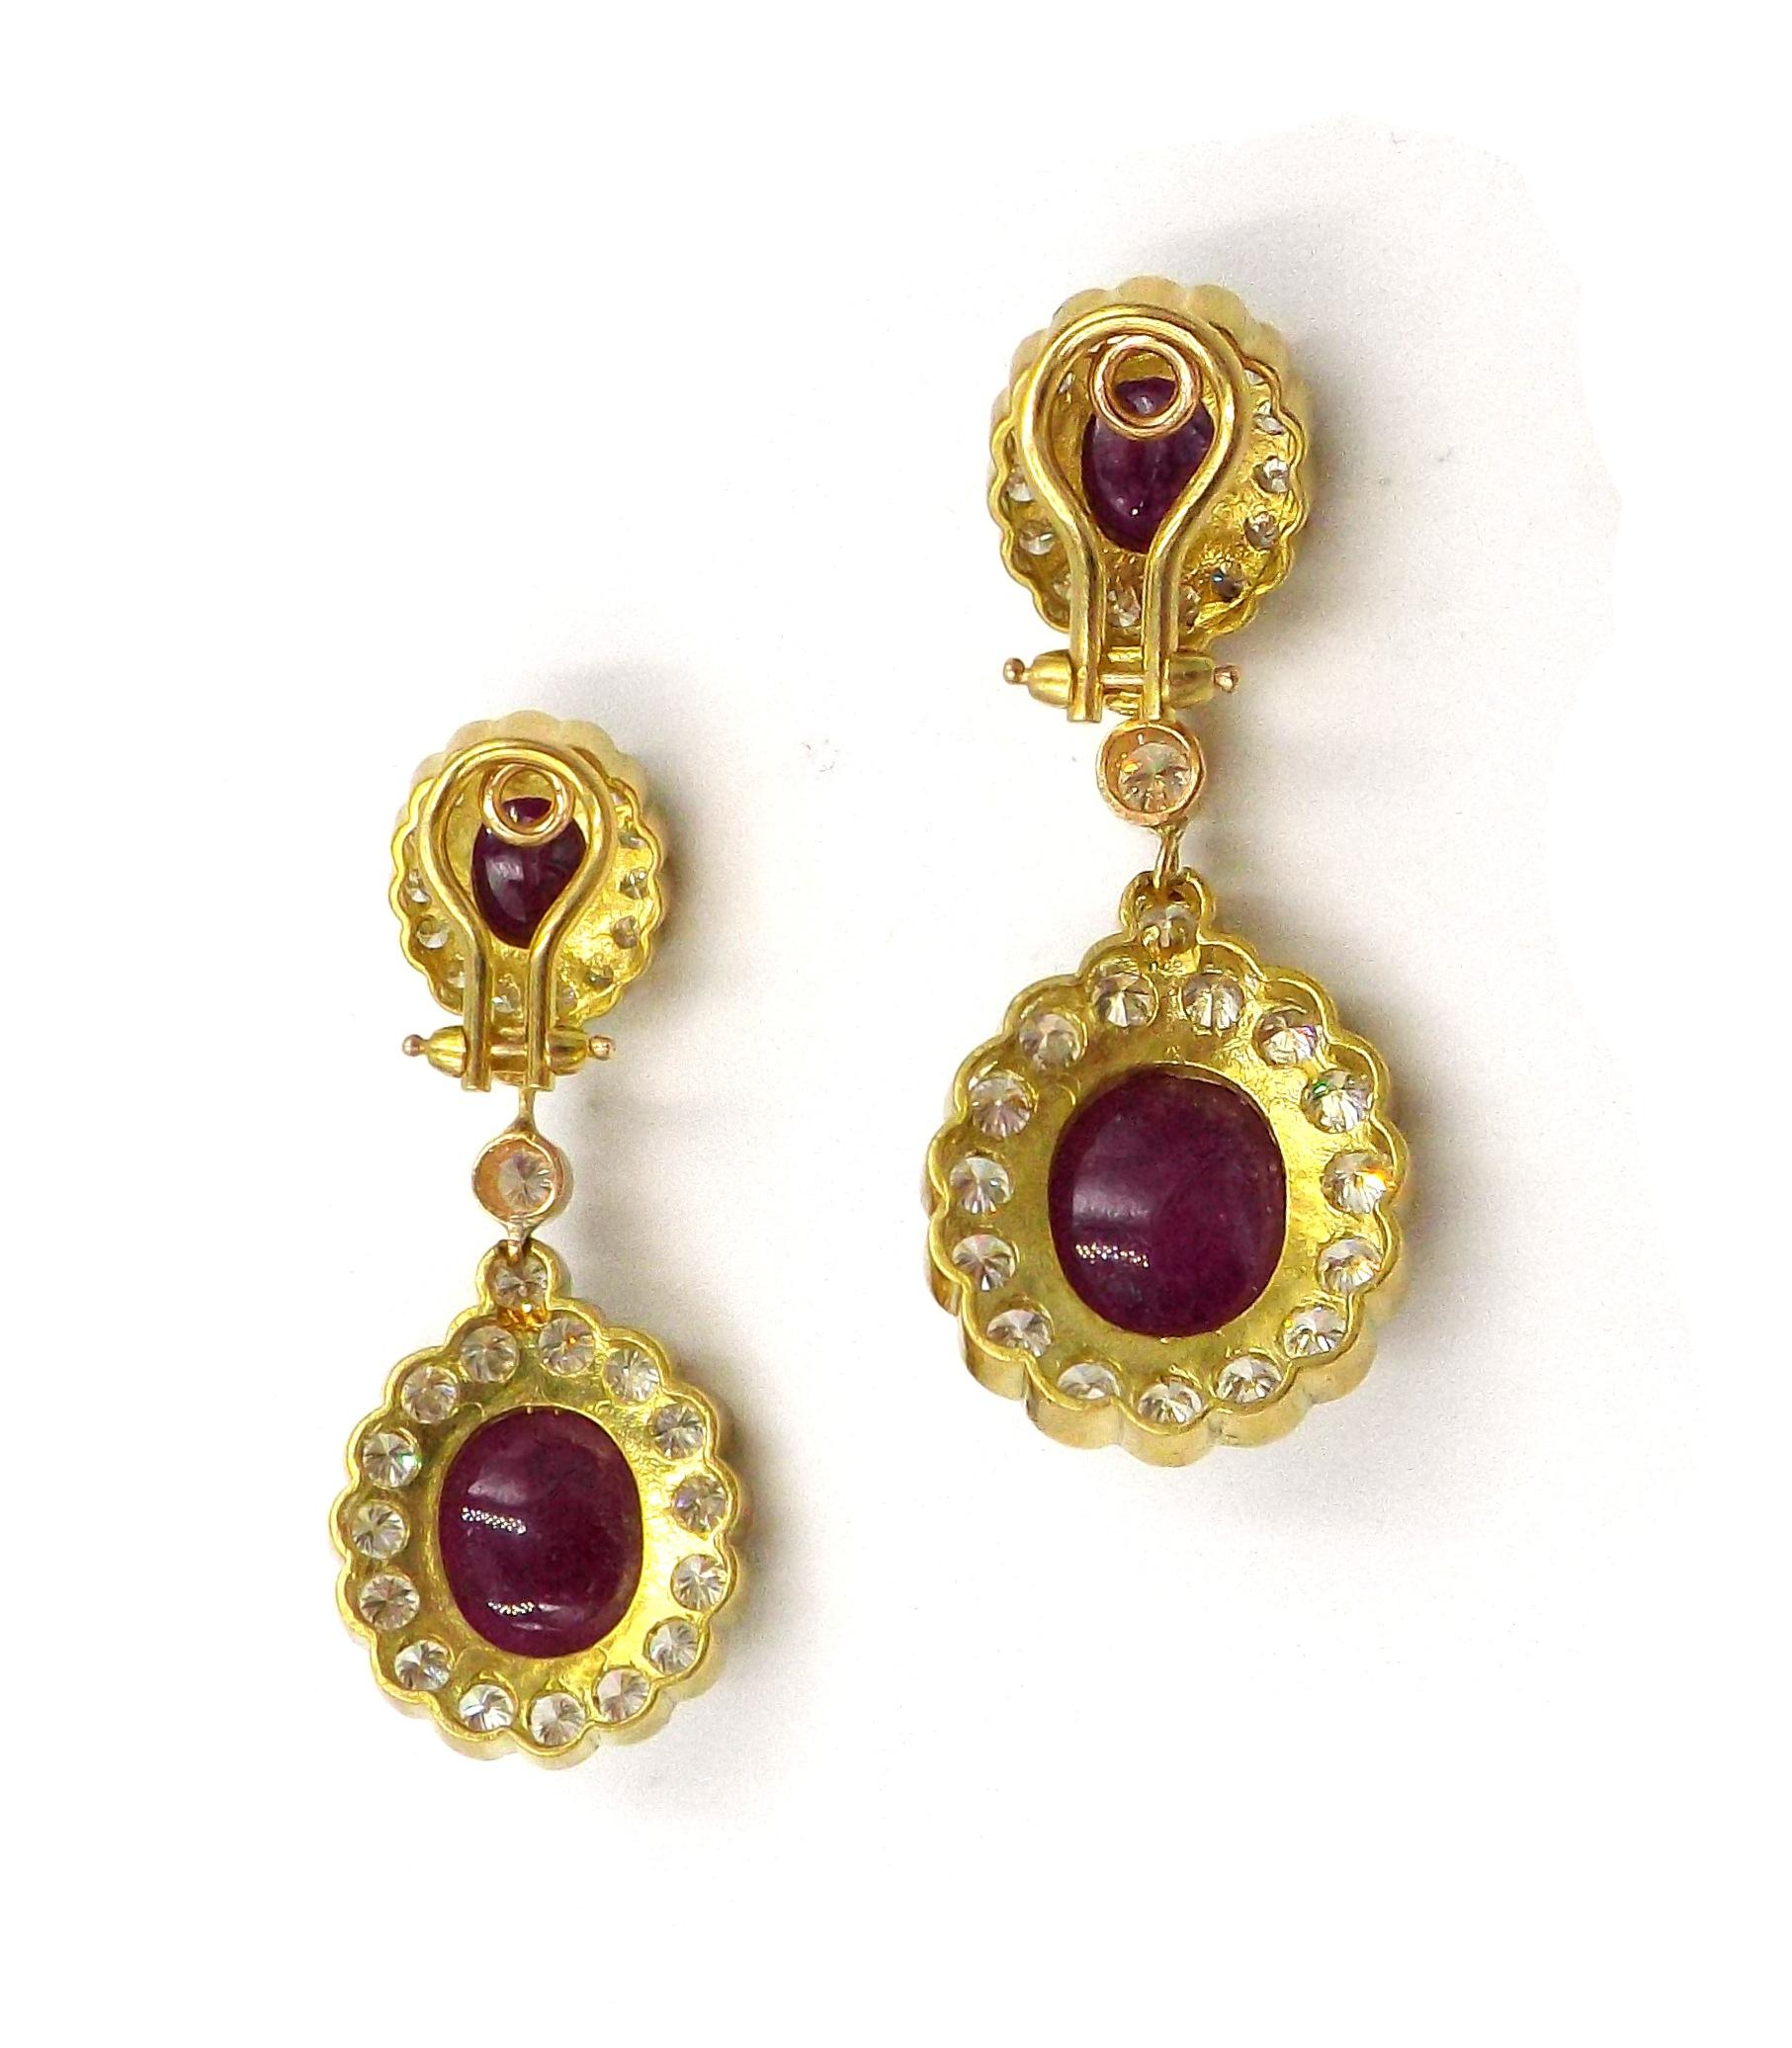 Each designed as an oval cabochon ruby with round diamond surround, suspending a larger pendant of matching design, mounted in 18k yellow gold. 66 round diamonds weighing a total of approximately 7.00 carats. Dimensions 4.9 x 2 cm (at widest point),